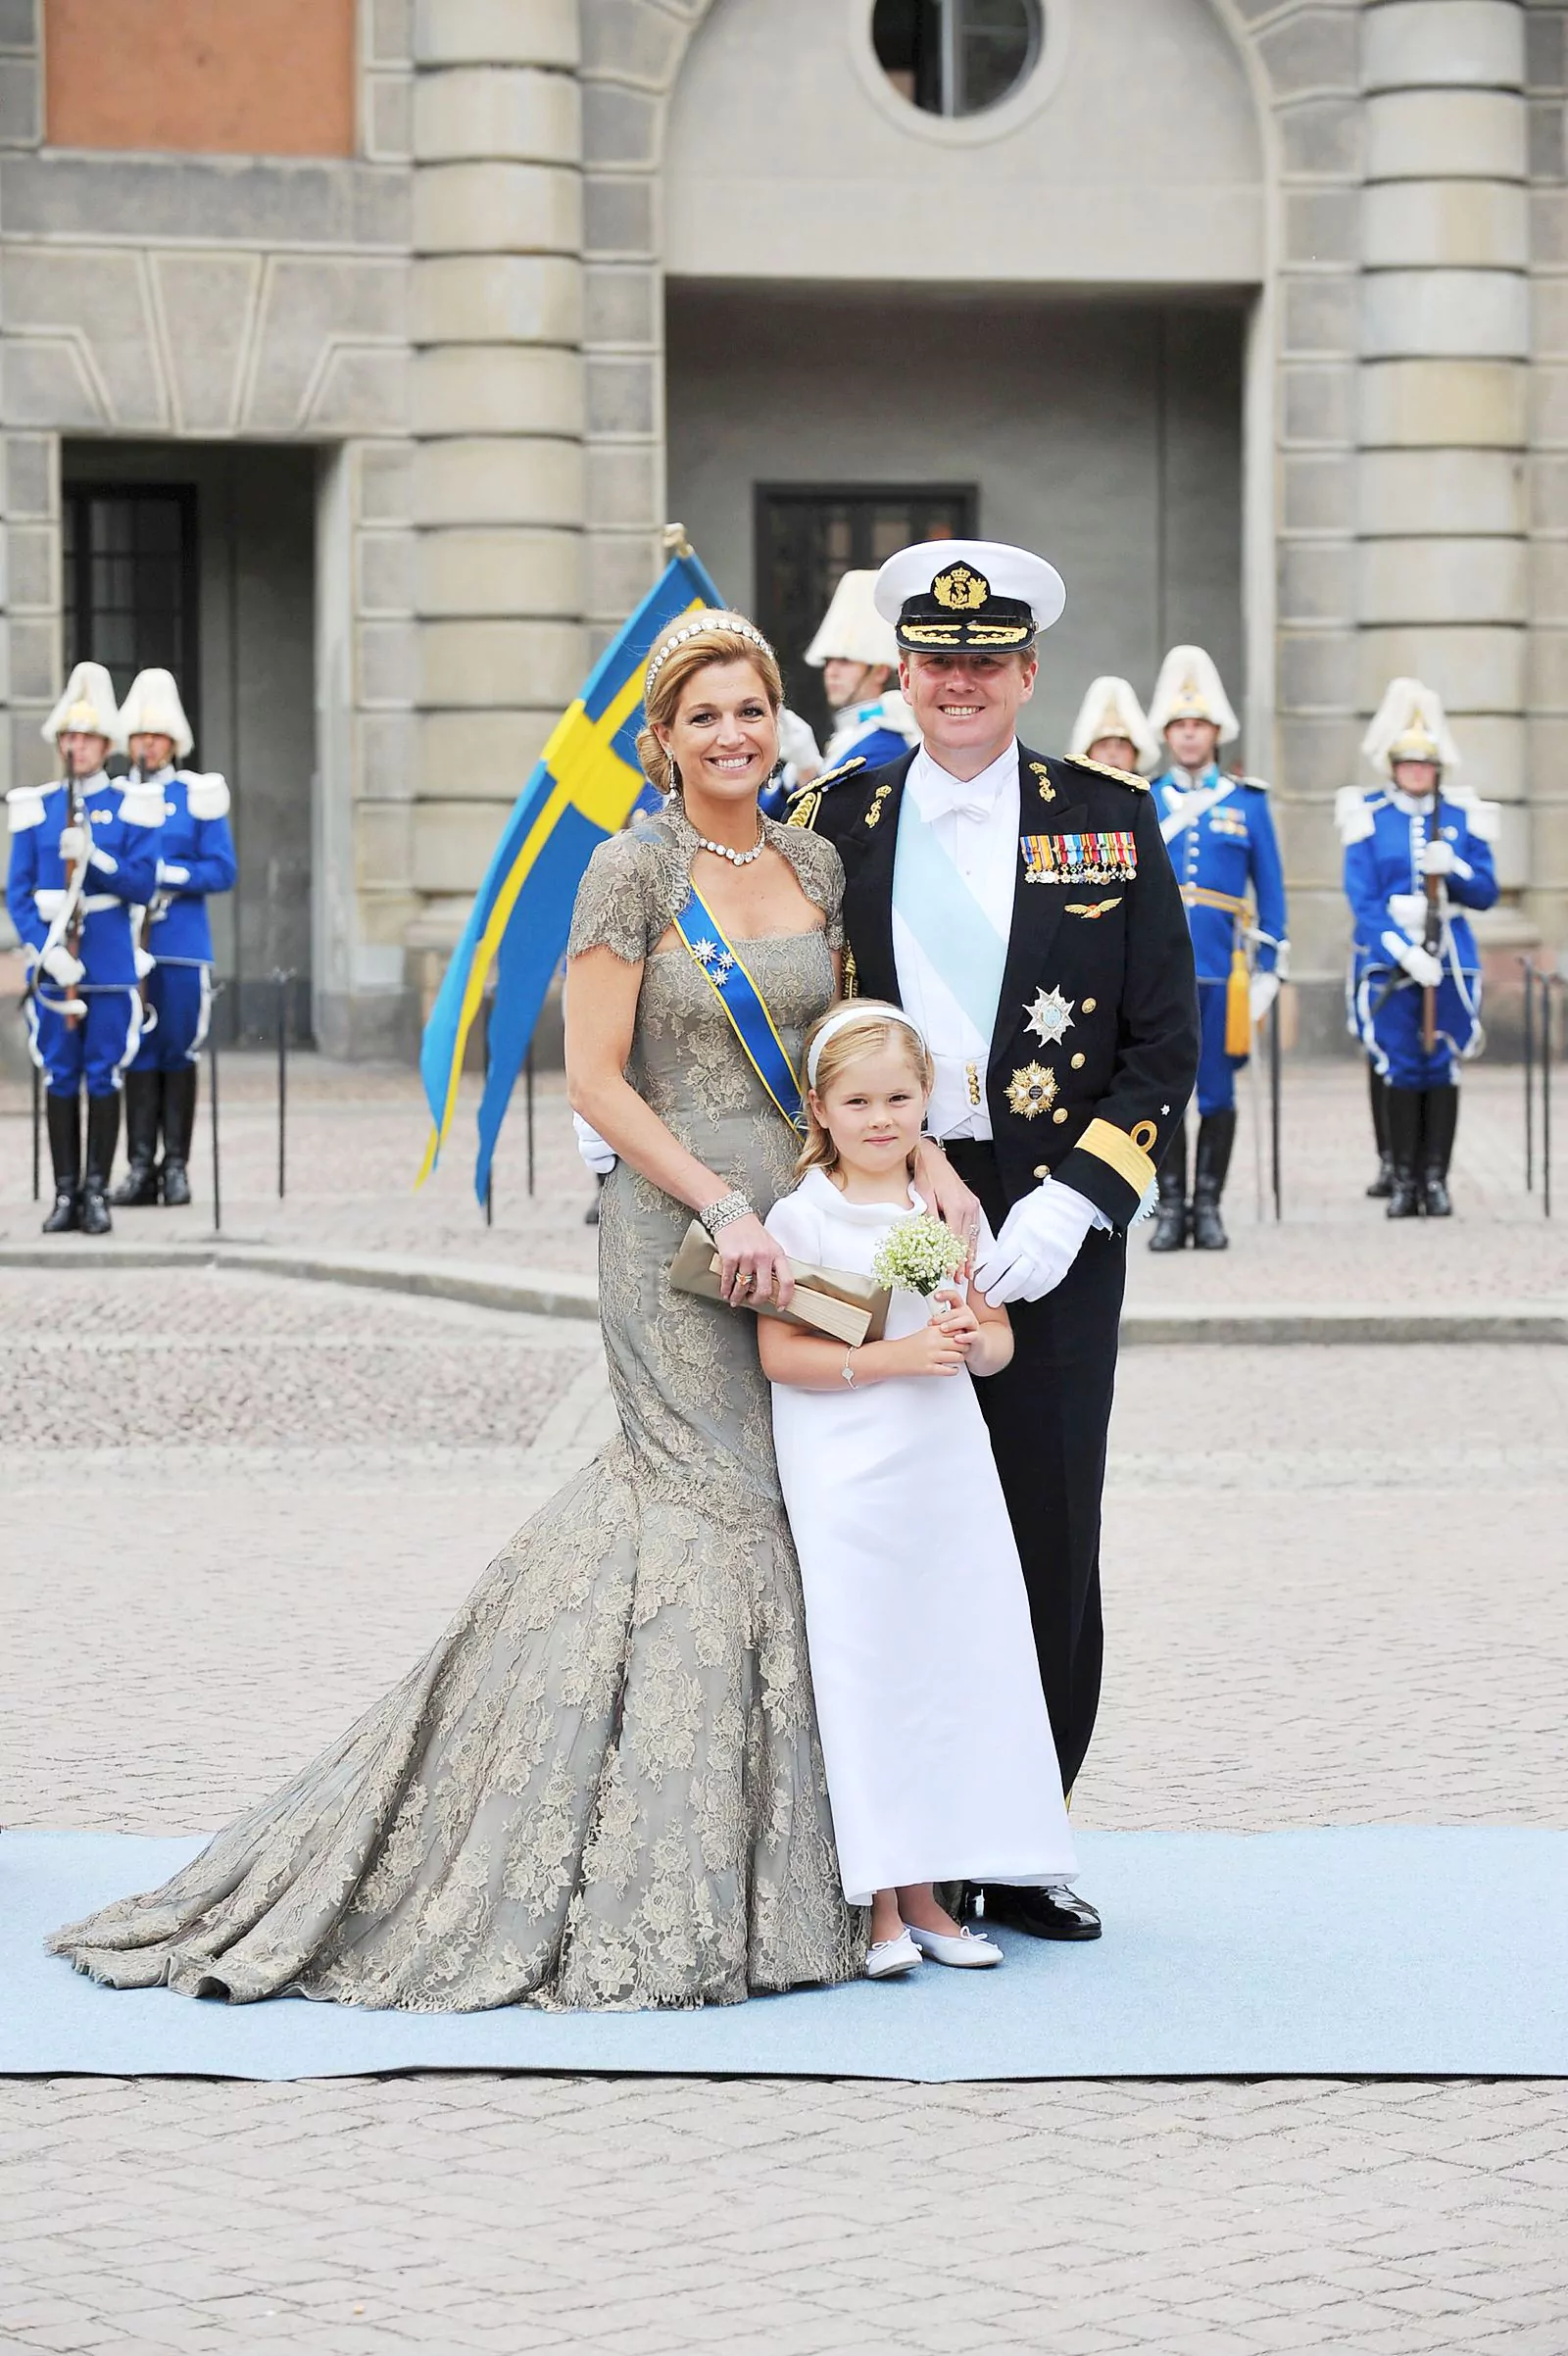 Prince Willem-Alexander of the Netherlands and Princess Maxima with their daughter at the wedding of Crown Princess Victoria of Sweden and Daniel Westling, June 19, 2010.